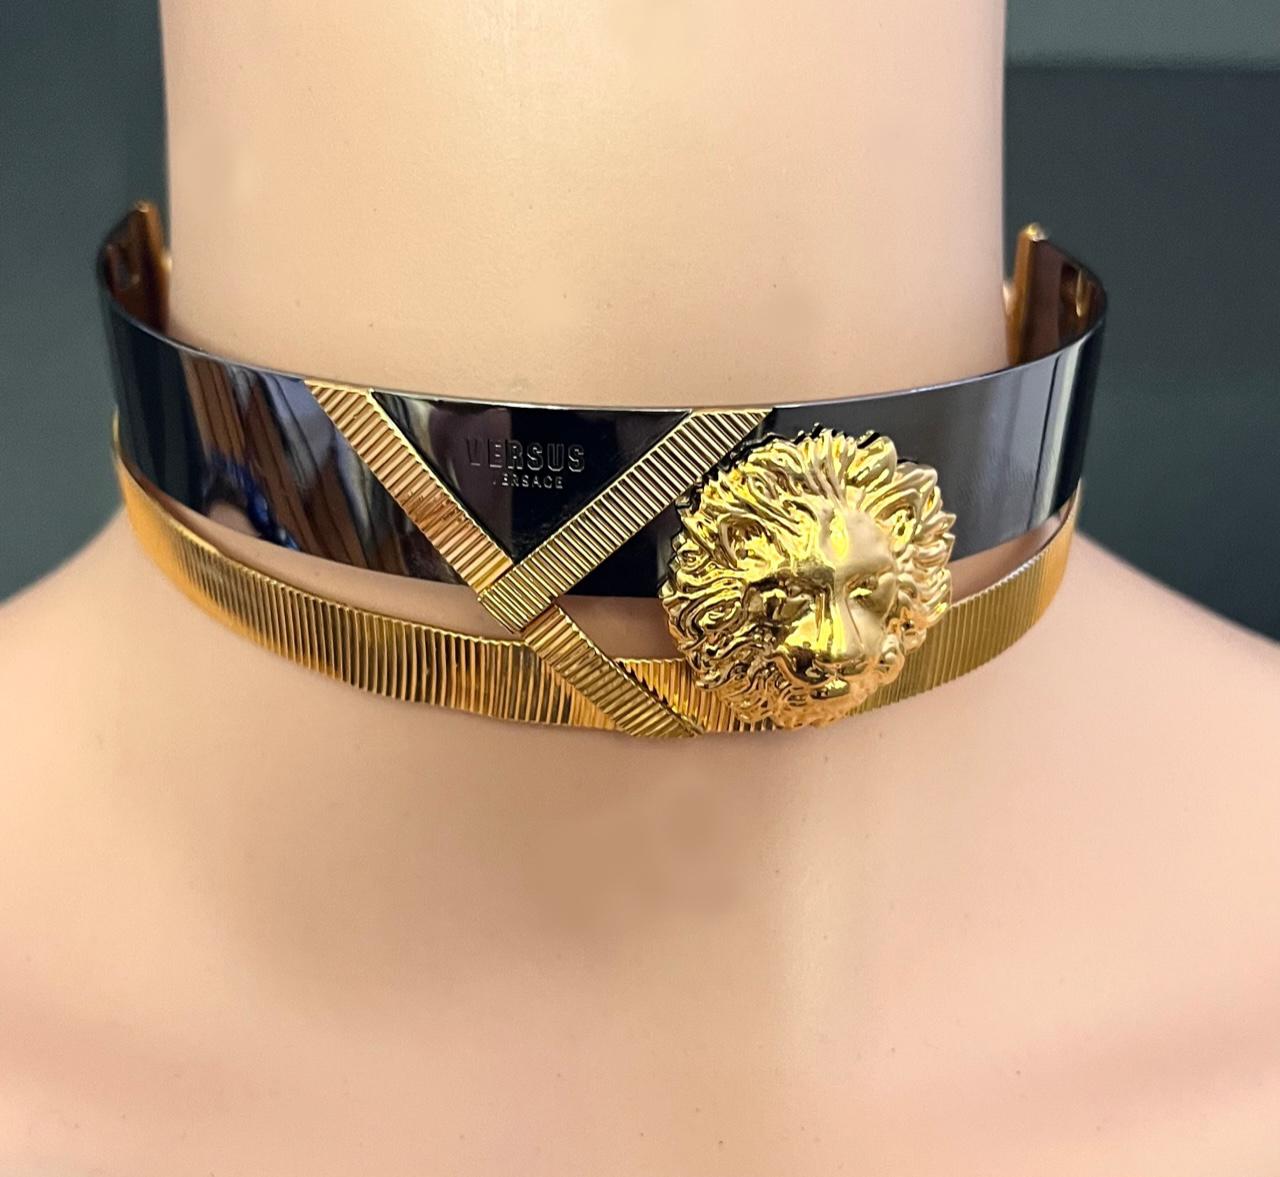 ANTHONY VACCARELLO x VERSUS VERSACE DOUBLE HOOPED LION SET In New Condition For Sale In Montgomery, TX